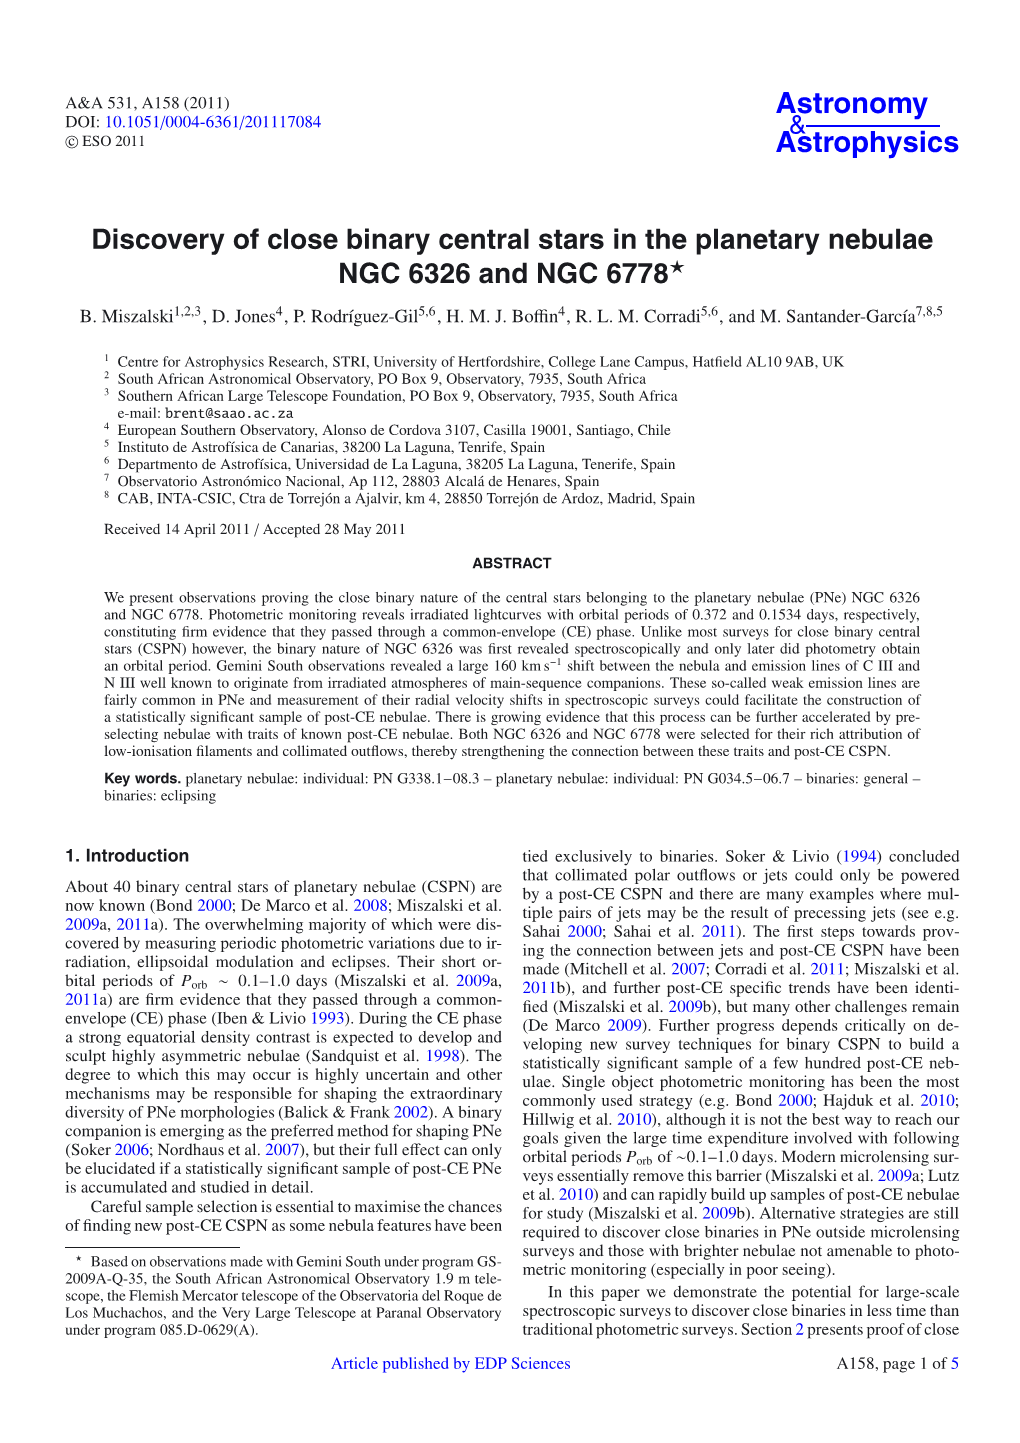 Discovery of Close Binary Central Stars in the Planetary Nebulae NGC 6326 and NGC 6778